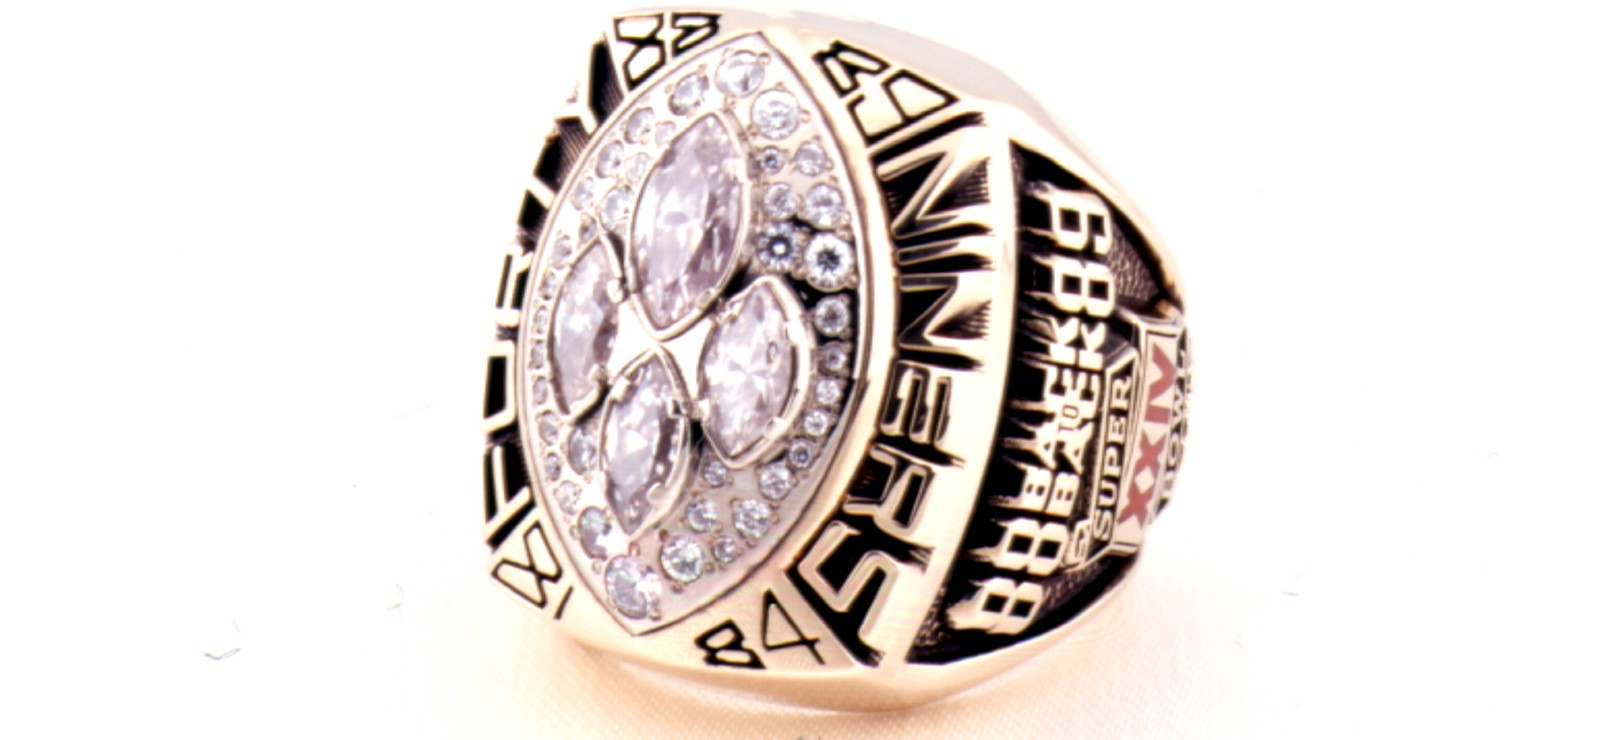 Lot Detail - San Francisco 49ers Super Bowl XXIV Ring Presented to Former  49er Player RC Owens